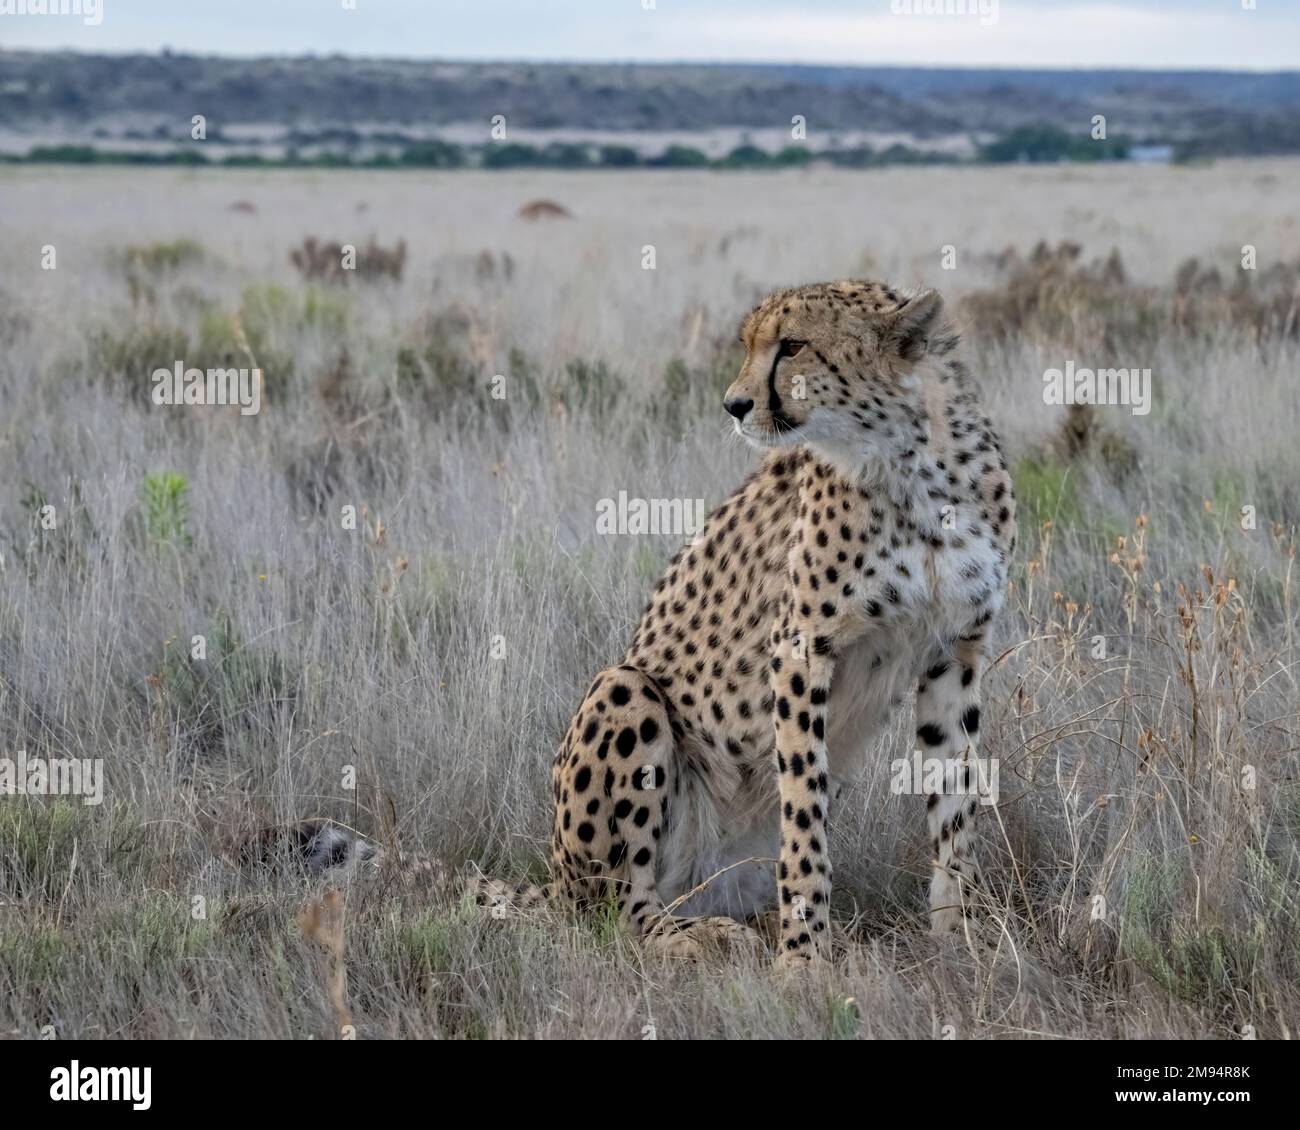 Female Cheeetah sitting in the Grasslands of Africa Stock Photo